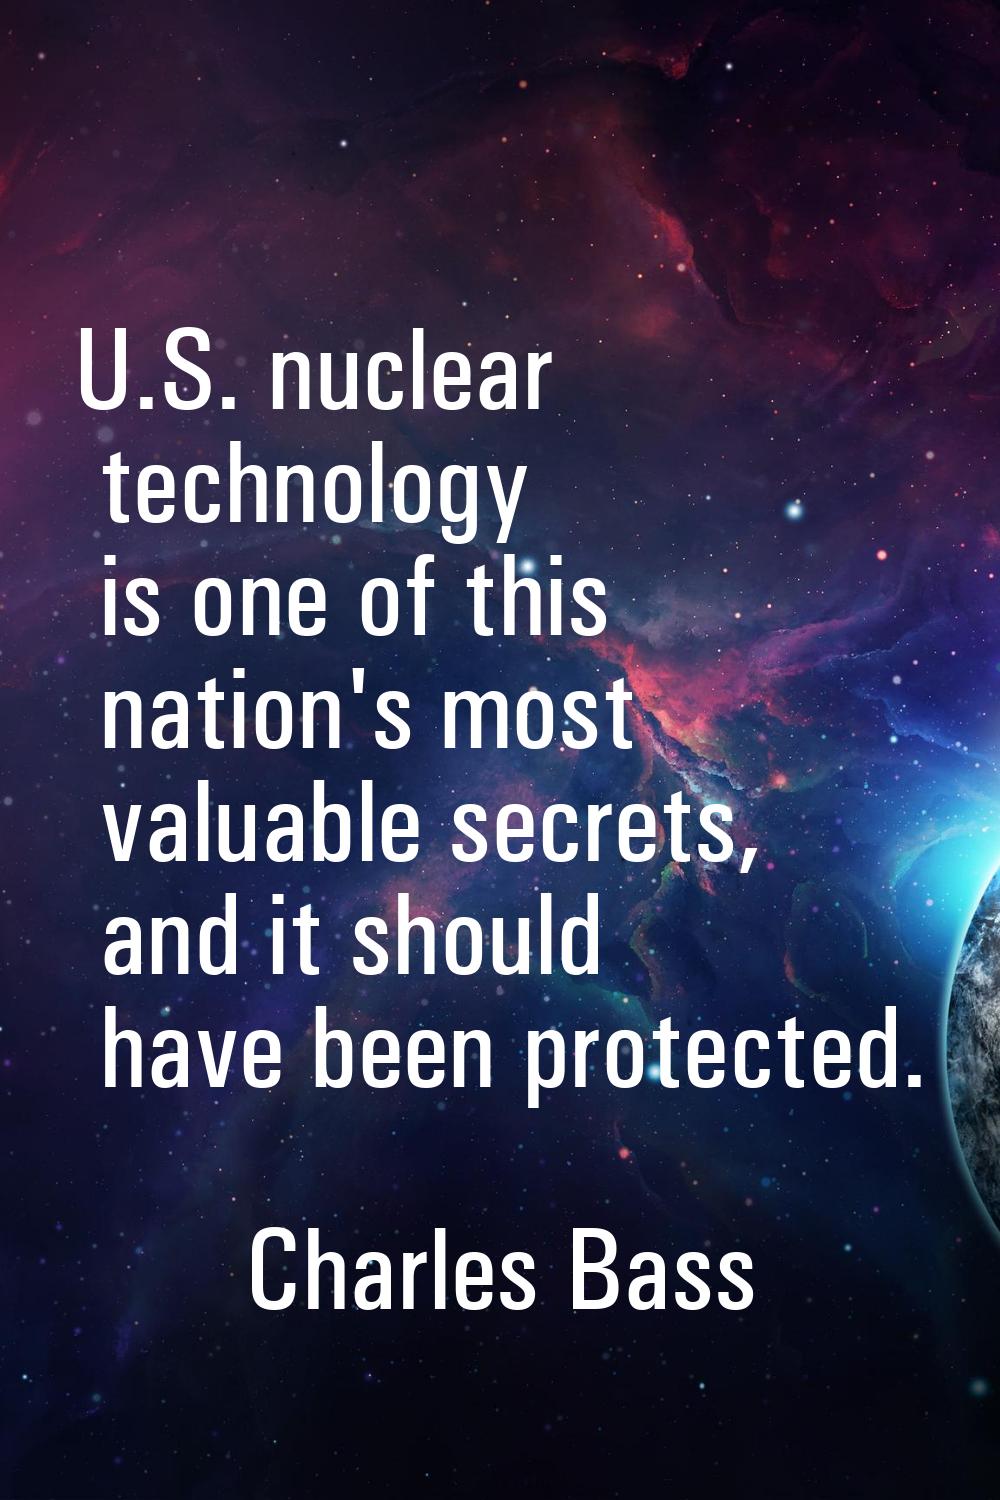 U.S. nuclear technology is one of this nation's most valuable secrets, and it should have been prot